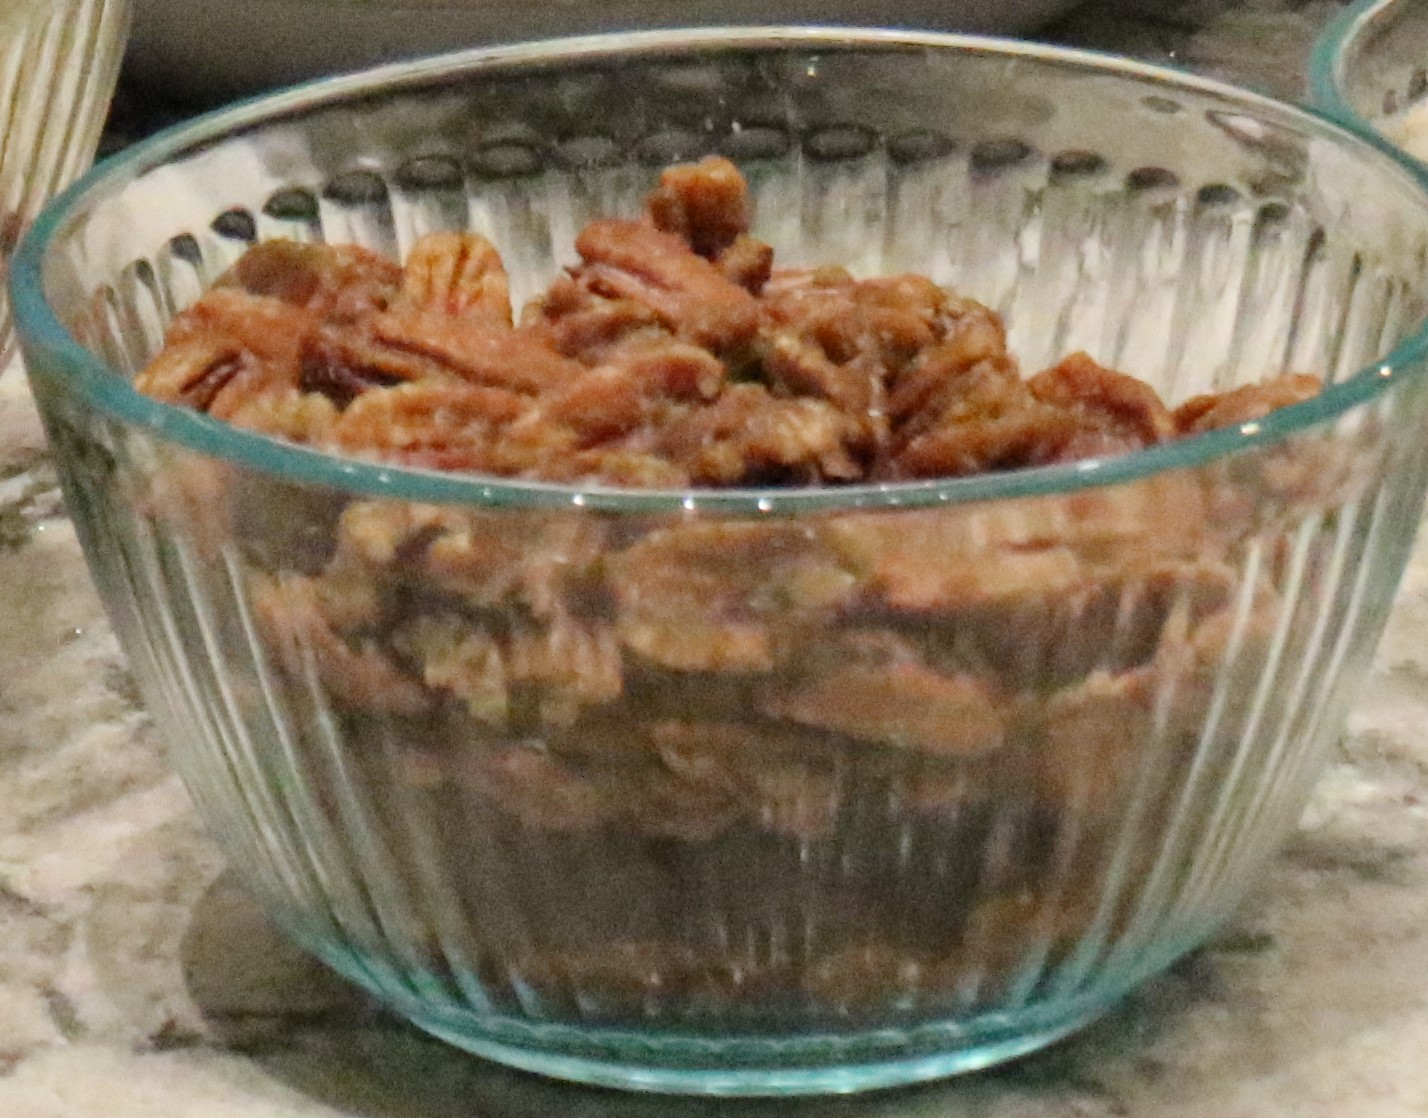 A bowl of candied pecans sits ready for a salad.